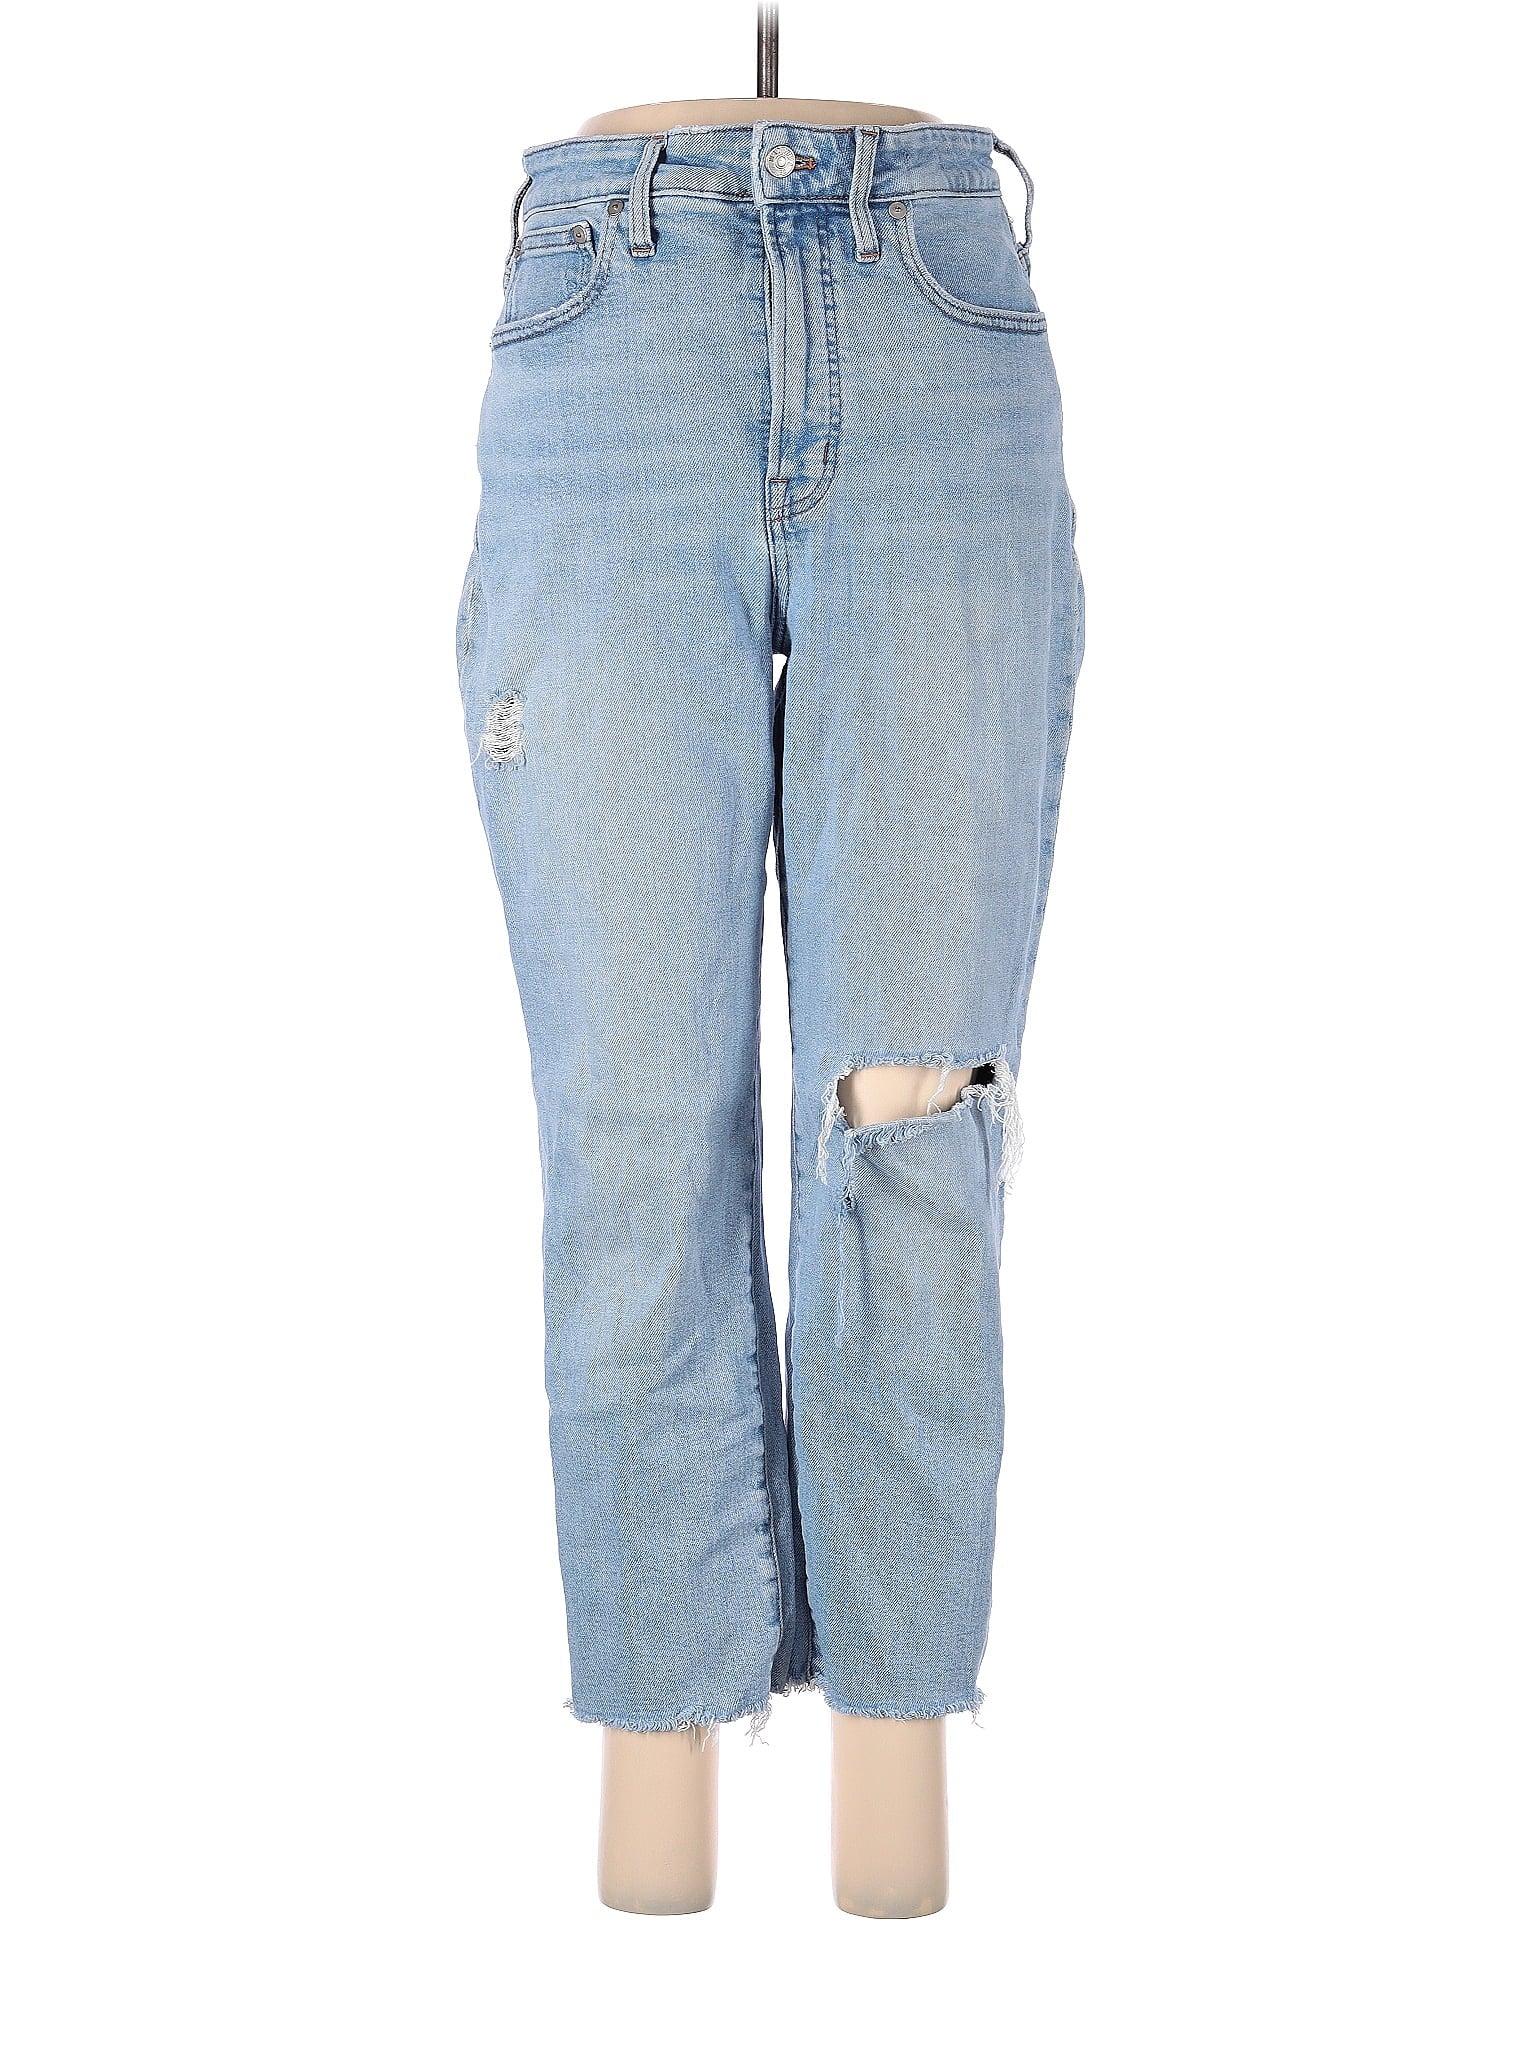 High-Rise Boyjeans Jeans in Light Wash waist size - 28 P